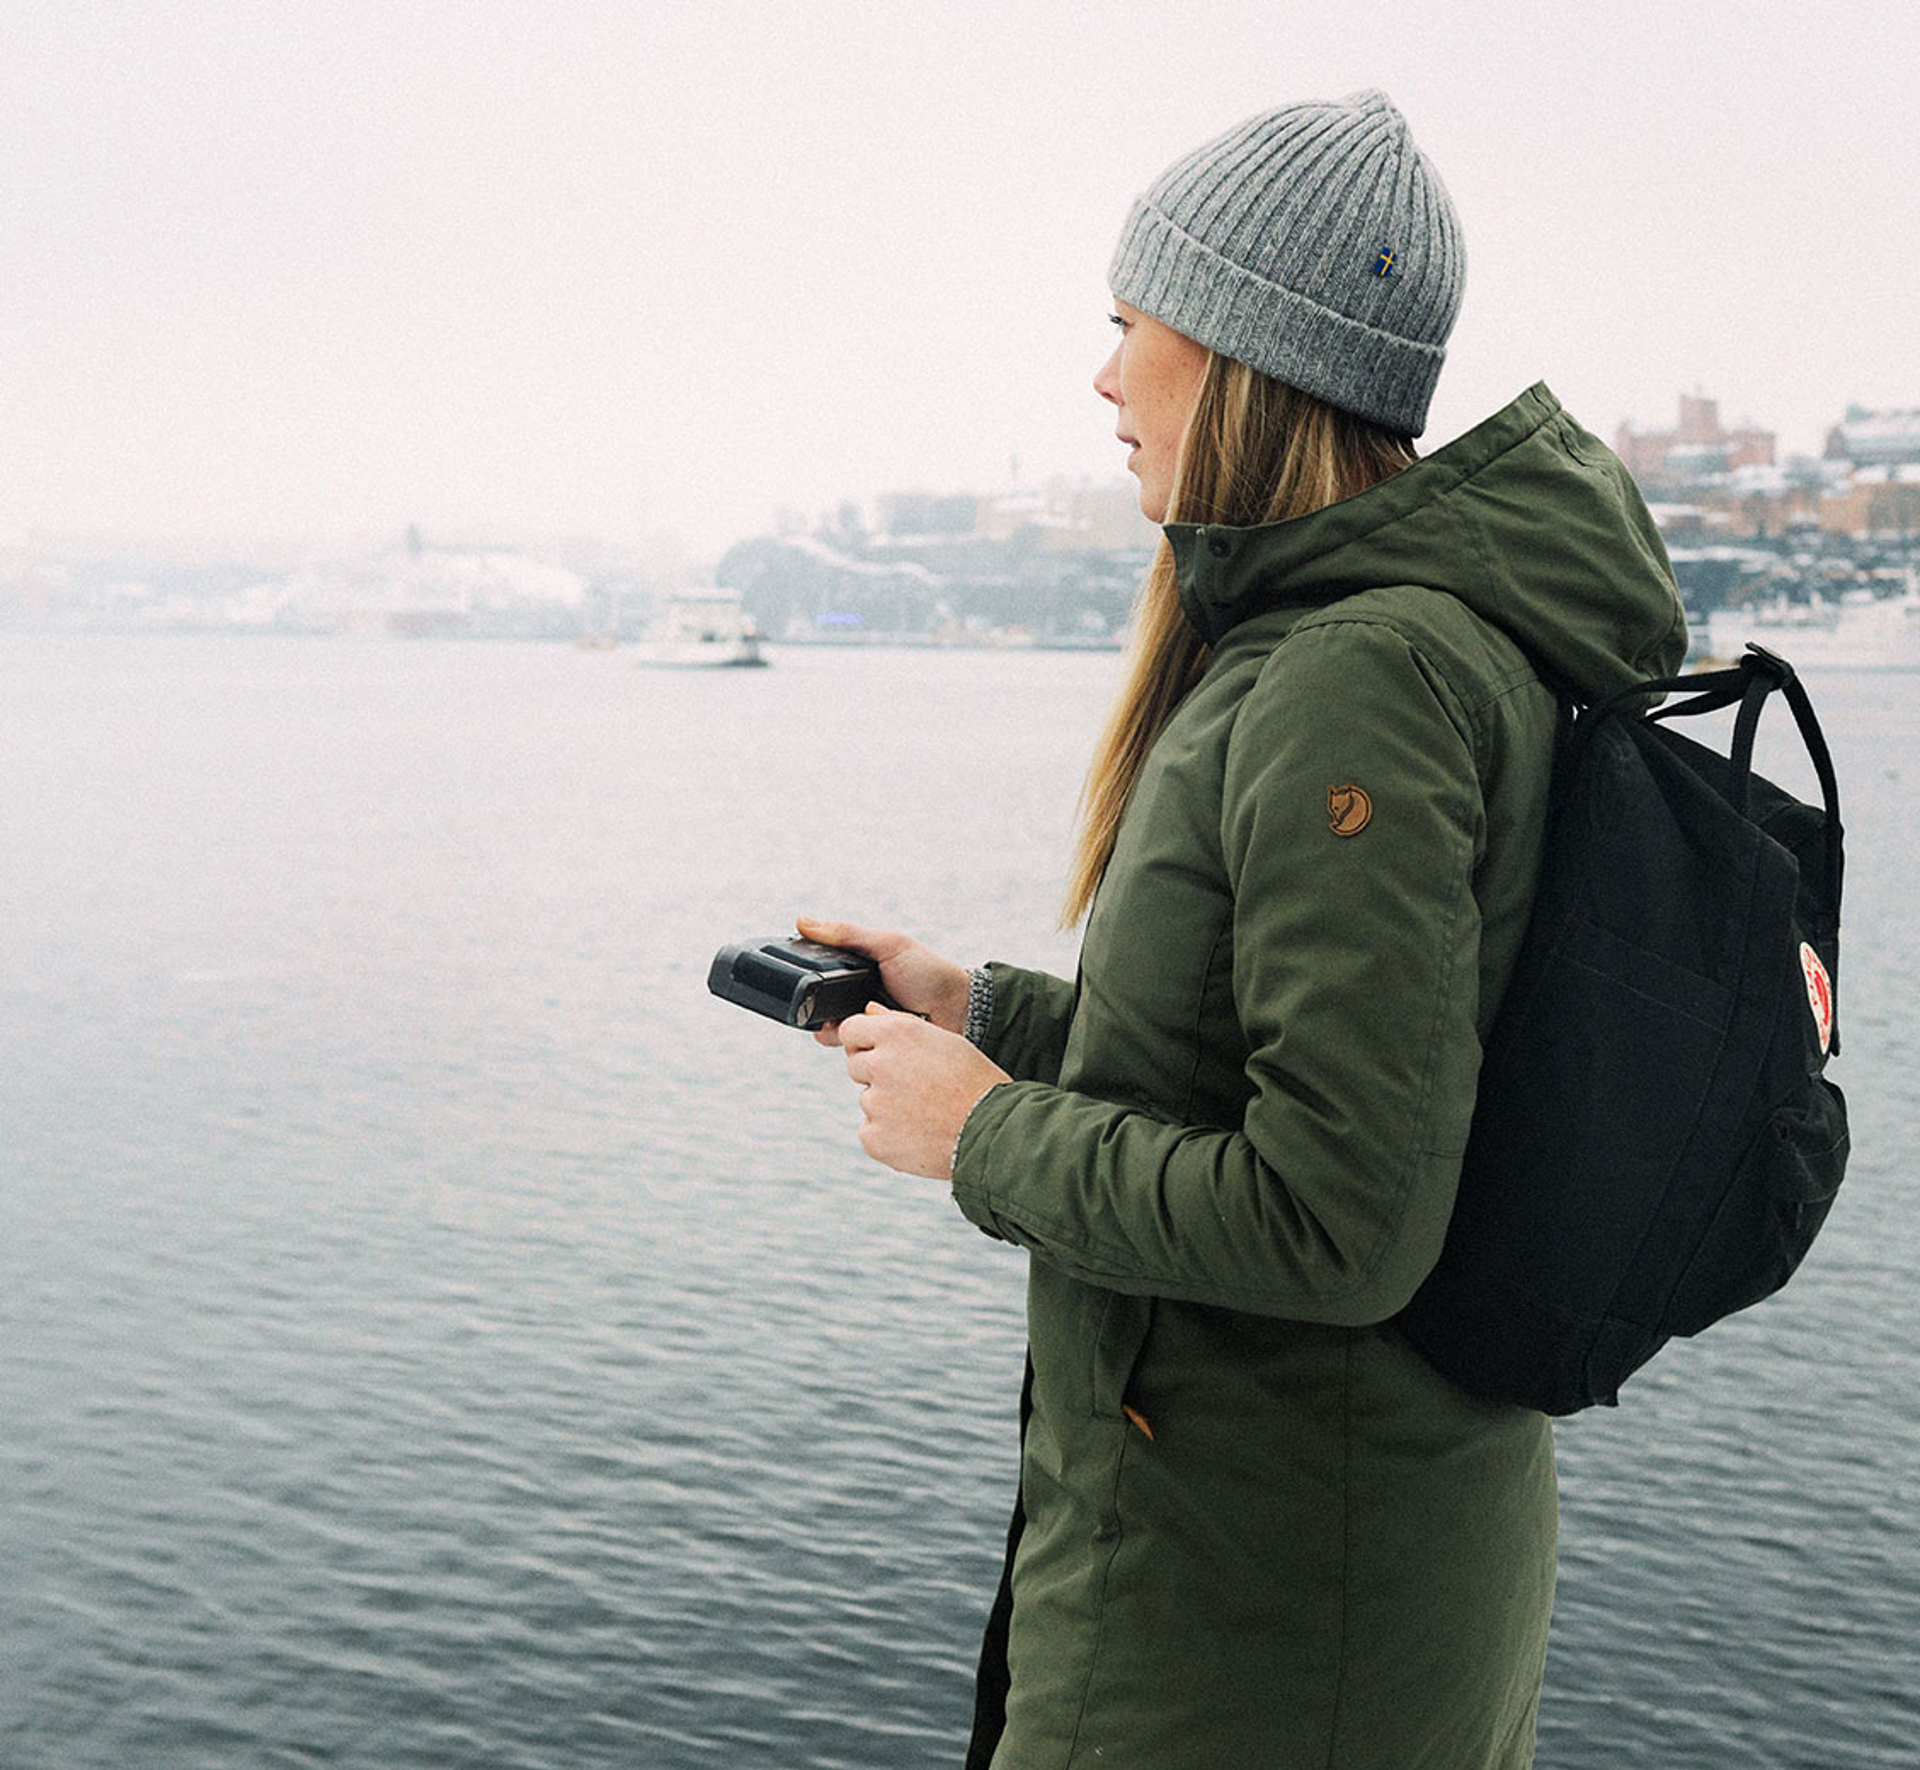 woman in fjallraven apparel standing by a river with a camera